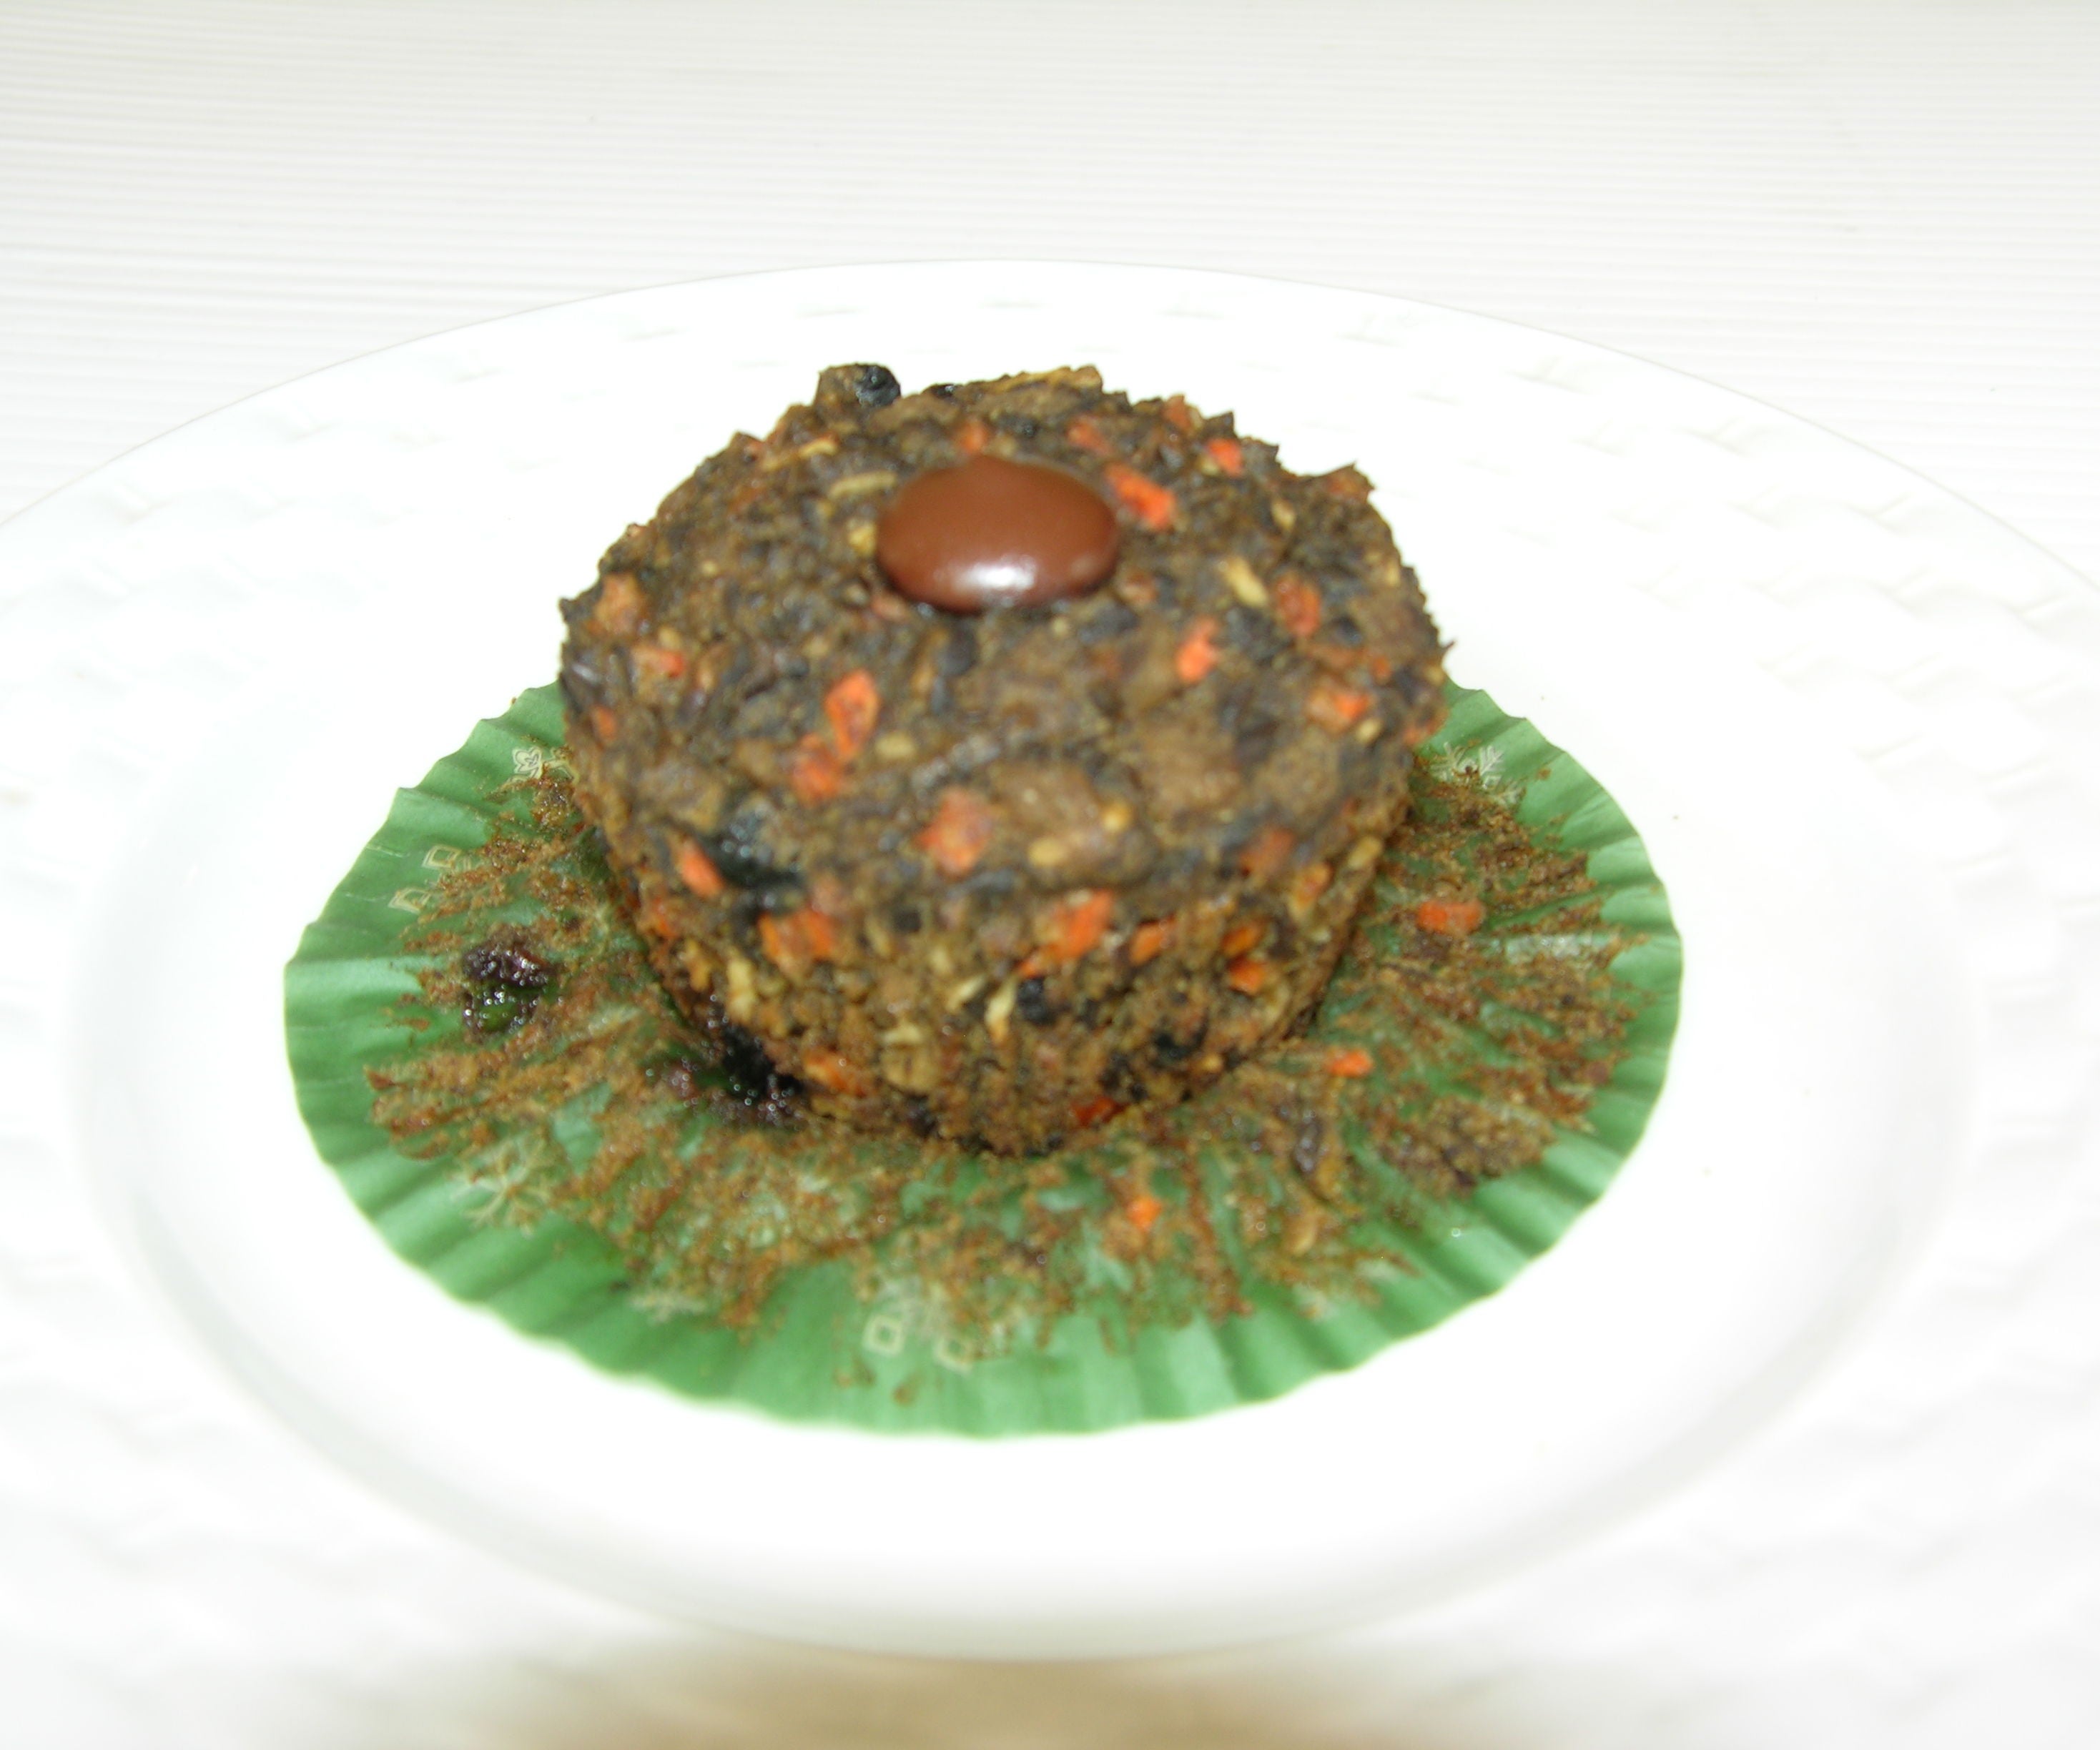 Azuki Bean (Red Bean), Carrot, and Blueberry Muffin